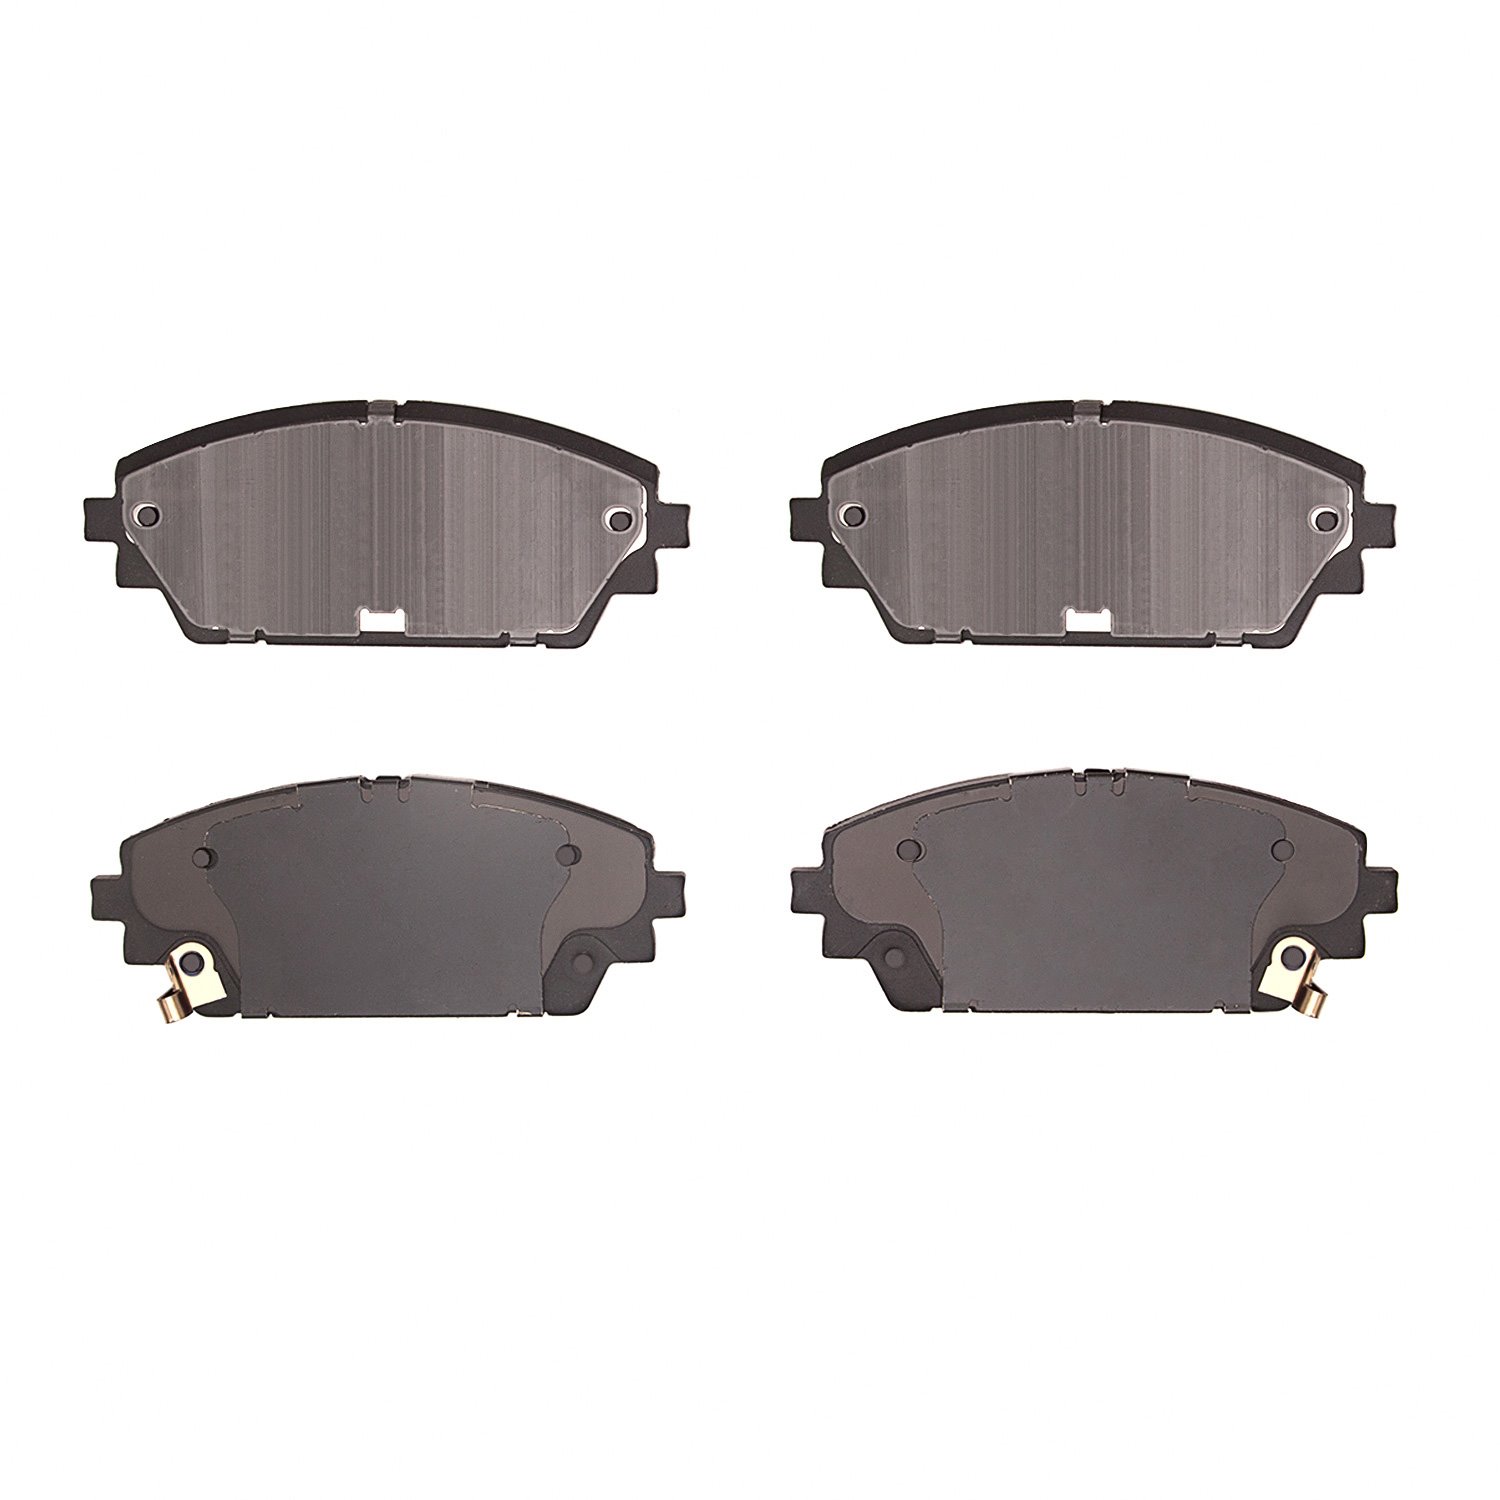 1310-2218-00 3000-Series Ceramic Brake Pads, Fits Select Ford/Lincoln/Mercury/Mazda, Position: Front